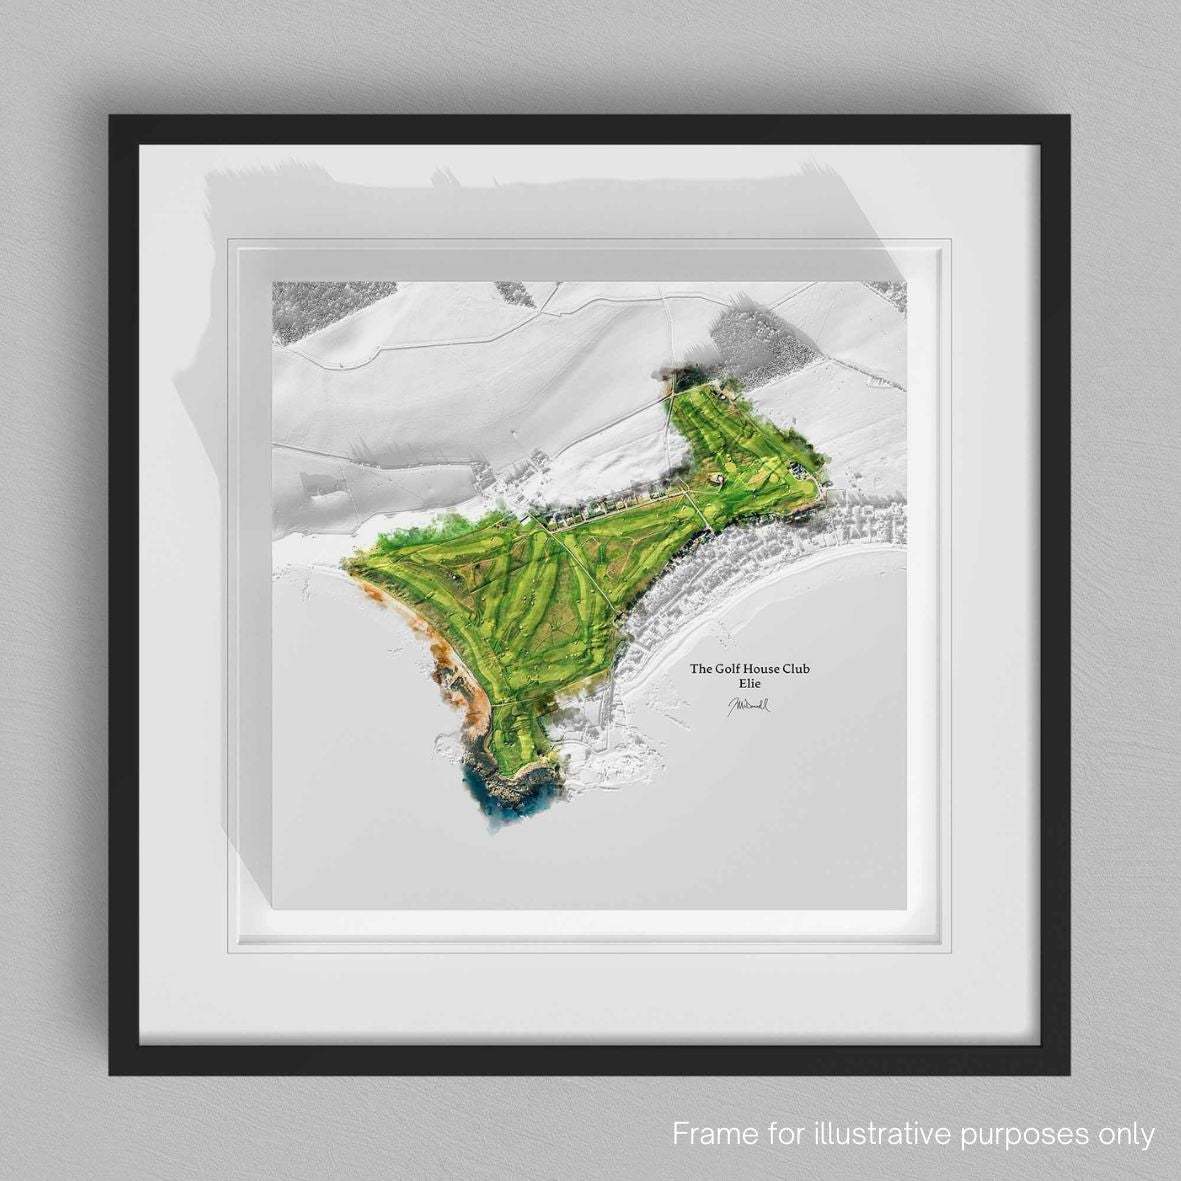 The Golf House Club Elie 3D Print in black frame by Joe McDonnell